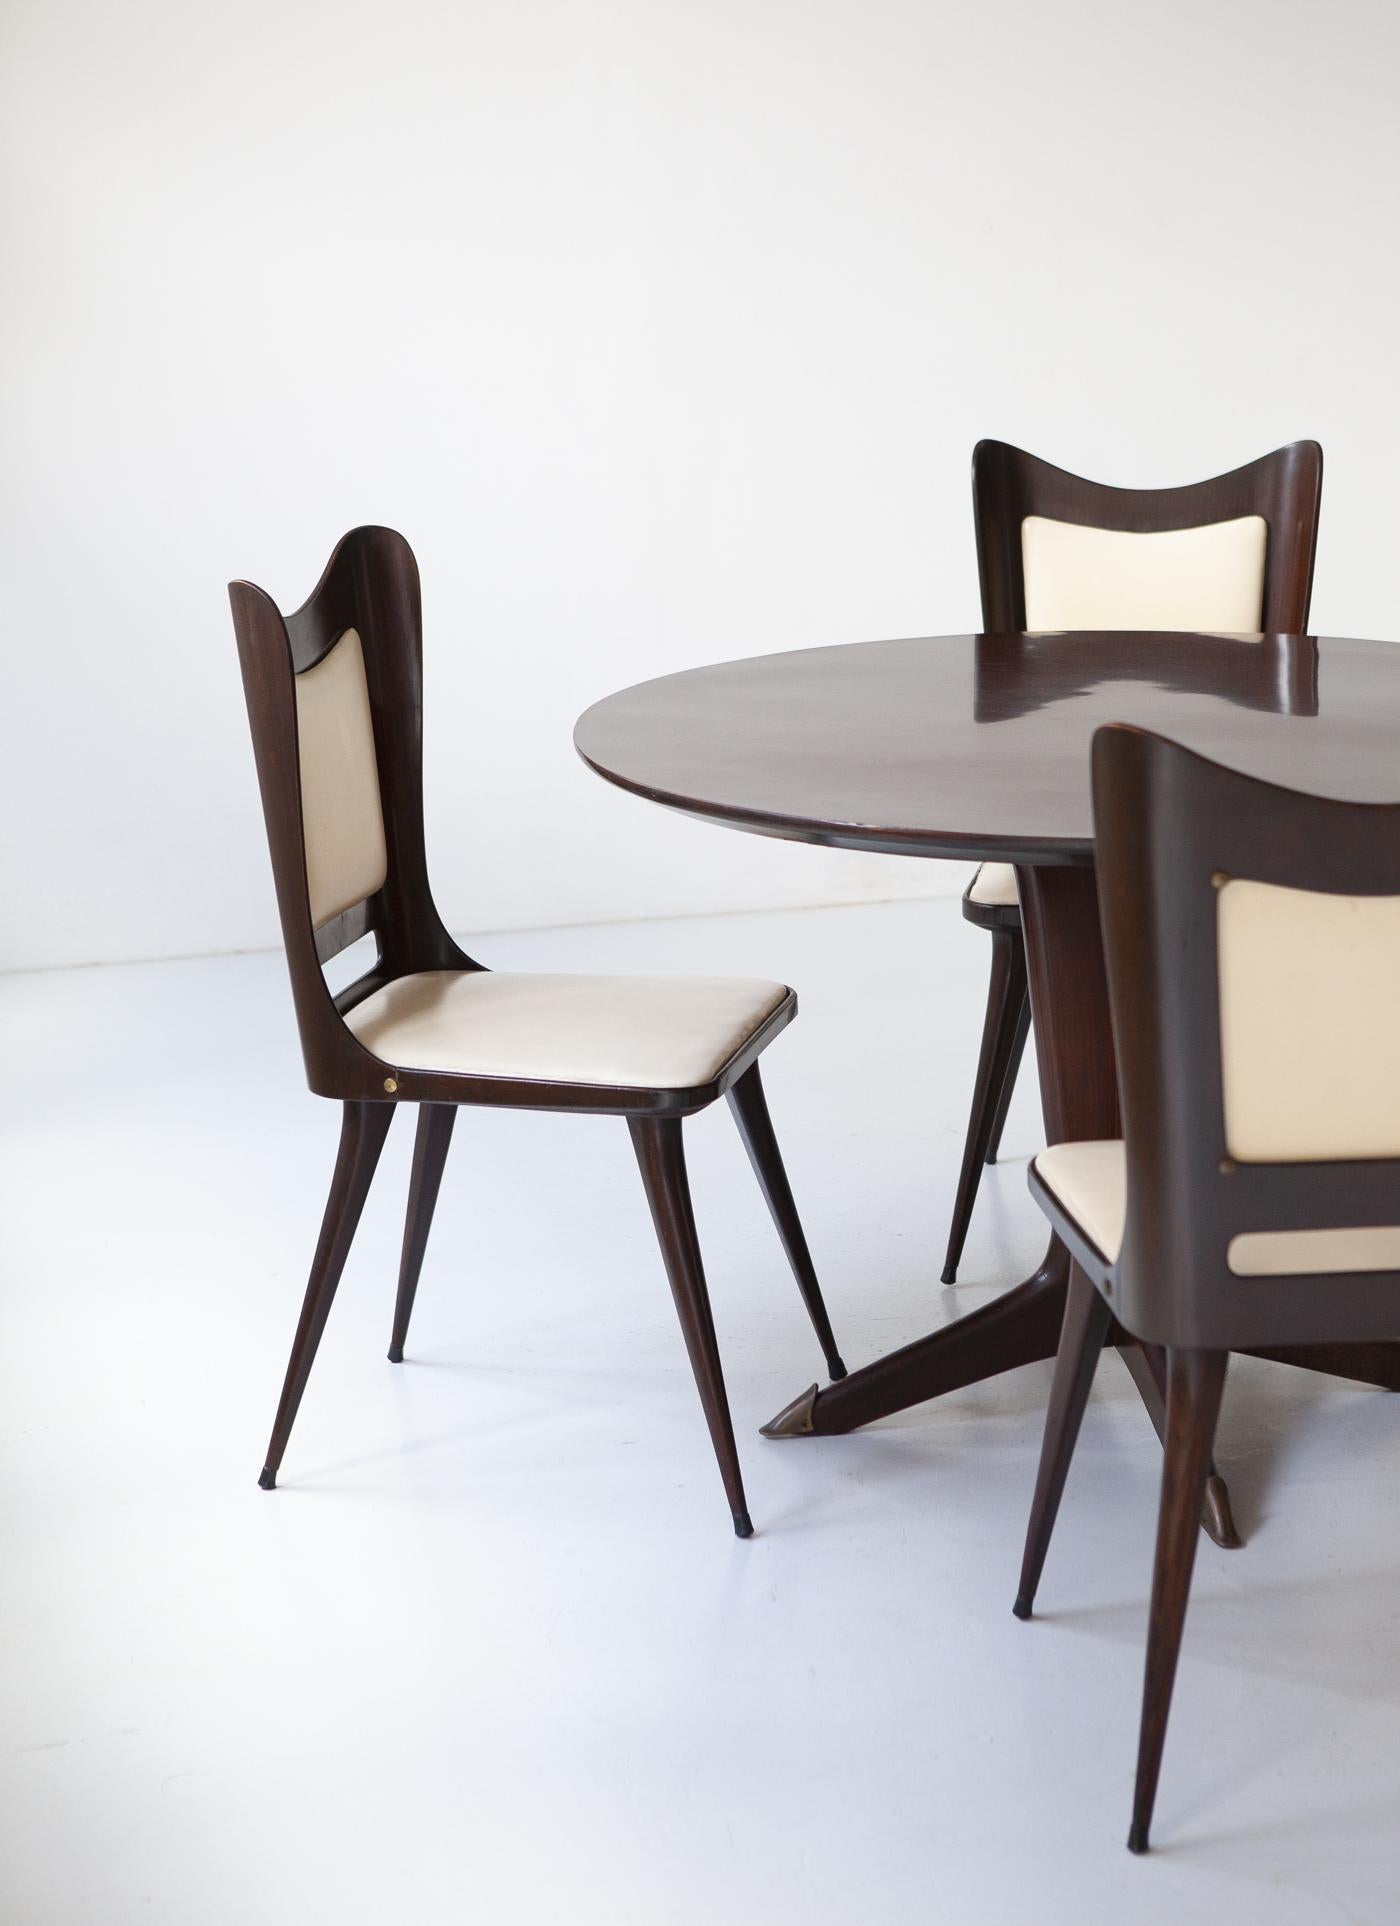 Italian Round Wooden Dining Table with 4 Chairs Set by Carlo Ratti 6